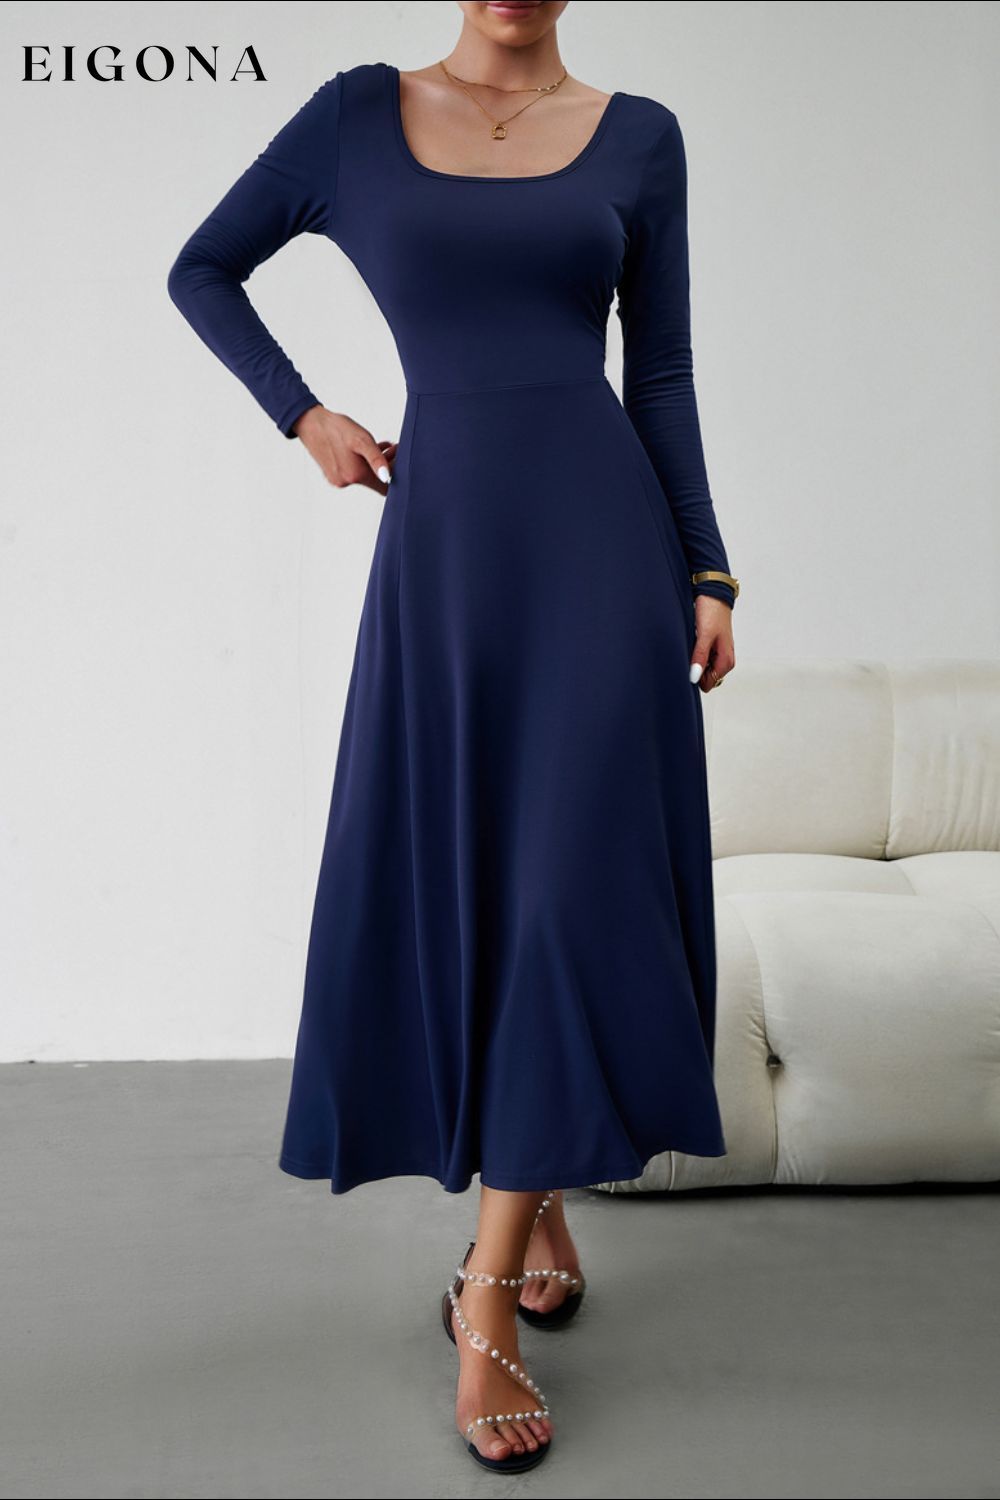 Scoop Neck Long Sleeve Lace-Up Maxi Dress Navy clothes dress dresses DY long dress maxi dress Ship From Overseas